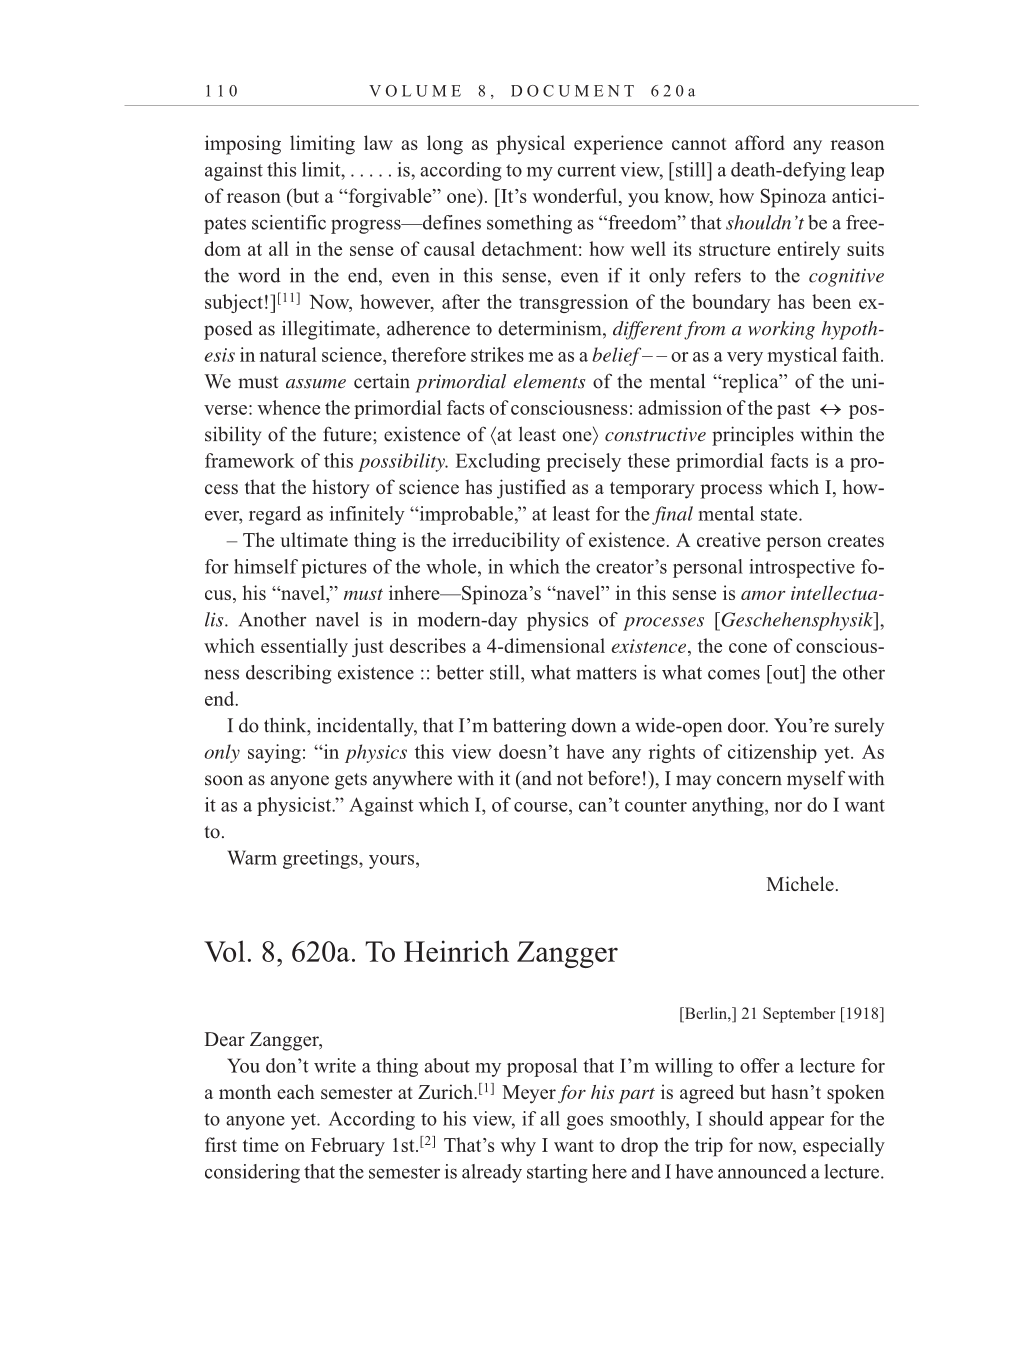 Volume 10: The Berlin Years: Correspondence, May-December 1920, and Supplementary Correspondence, 1909-1920 (English translation supplement) page 110